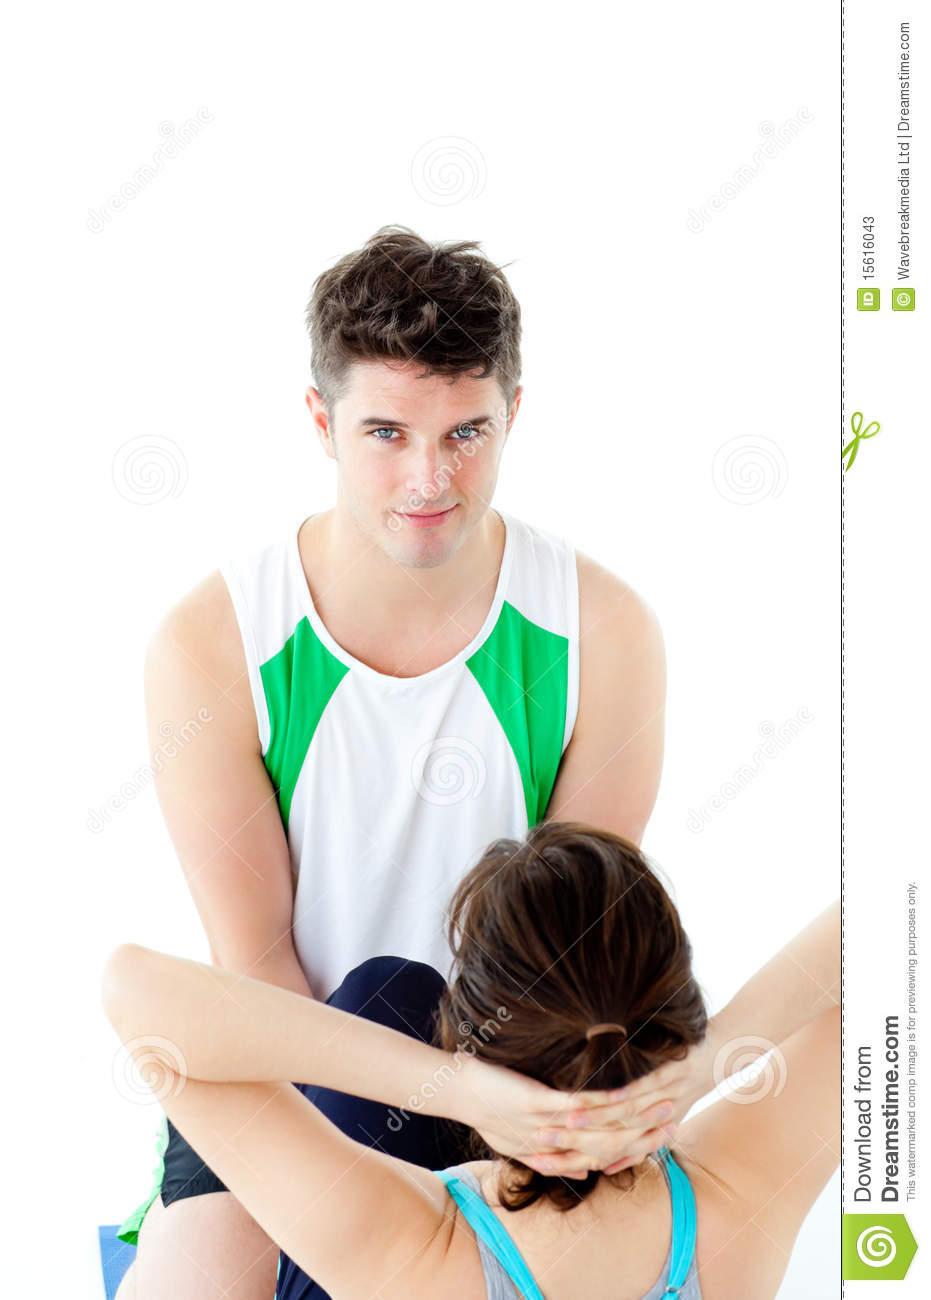 Male Therapist Doing Fitness Exercises With Woman Stock Photos   Image